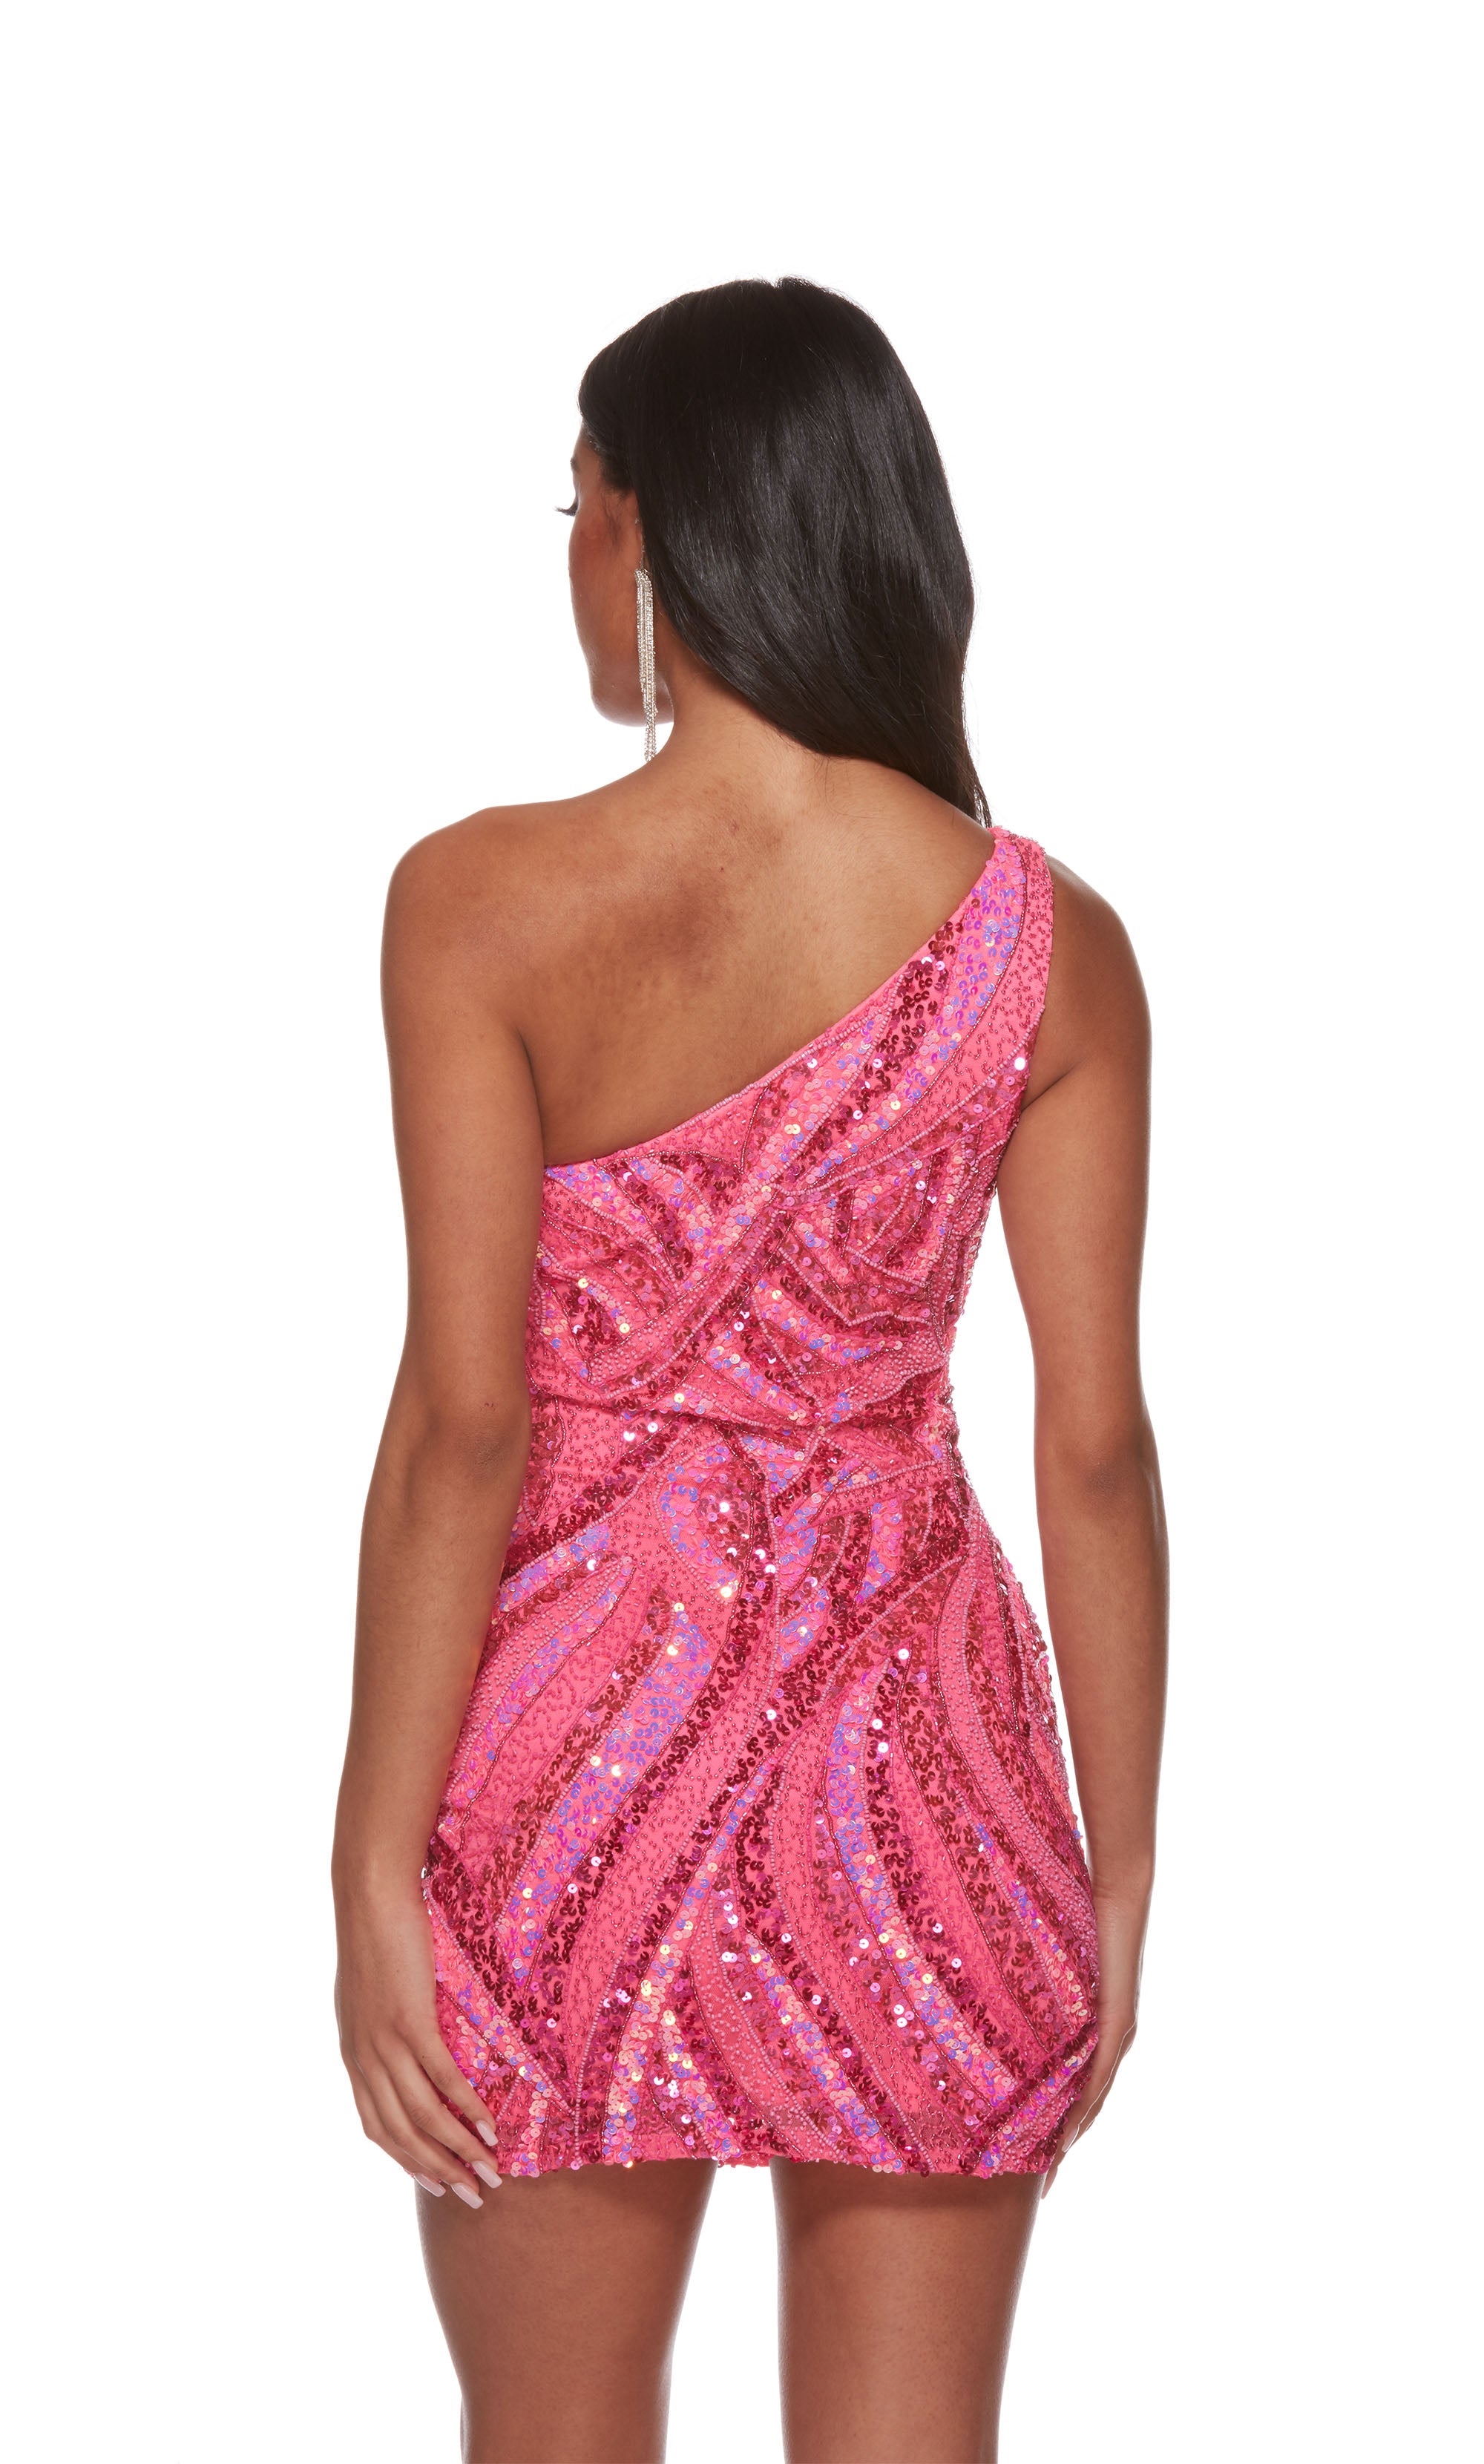 A patterned, hand-beaded short formal dress created from multi-tonal pink sequins. The dress has a trendy one-shoulder neckline and a fitted silhouette. Check out our latest collection of gorgeous designer dresses by ALYCE Paris.